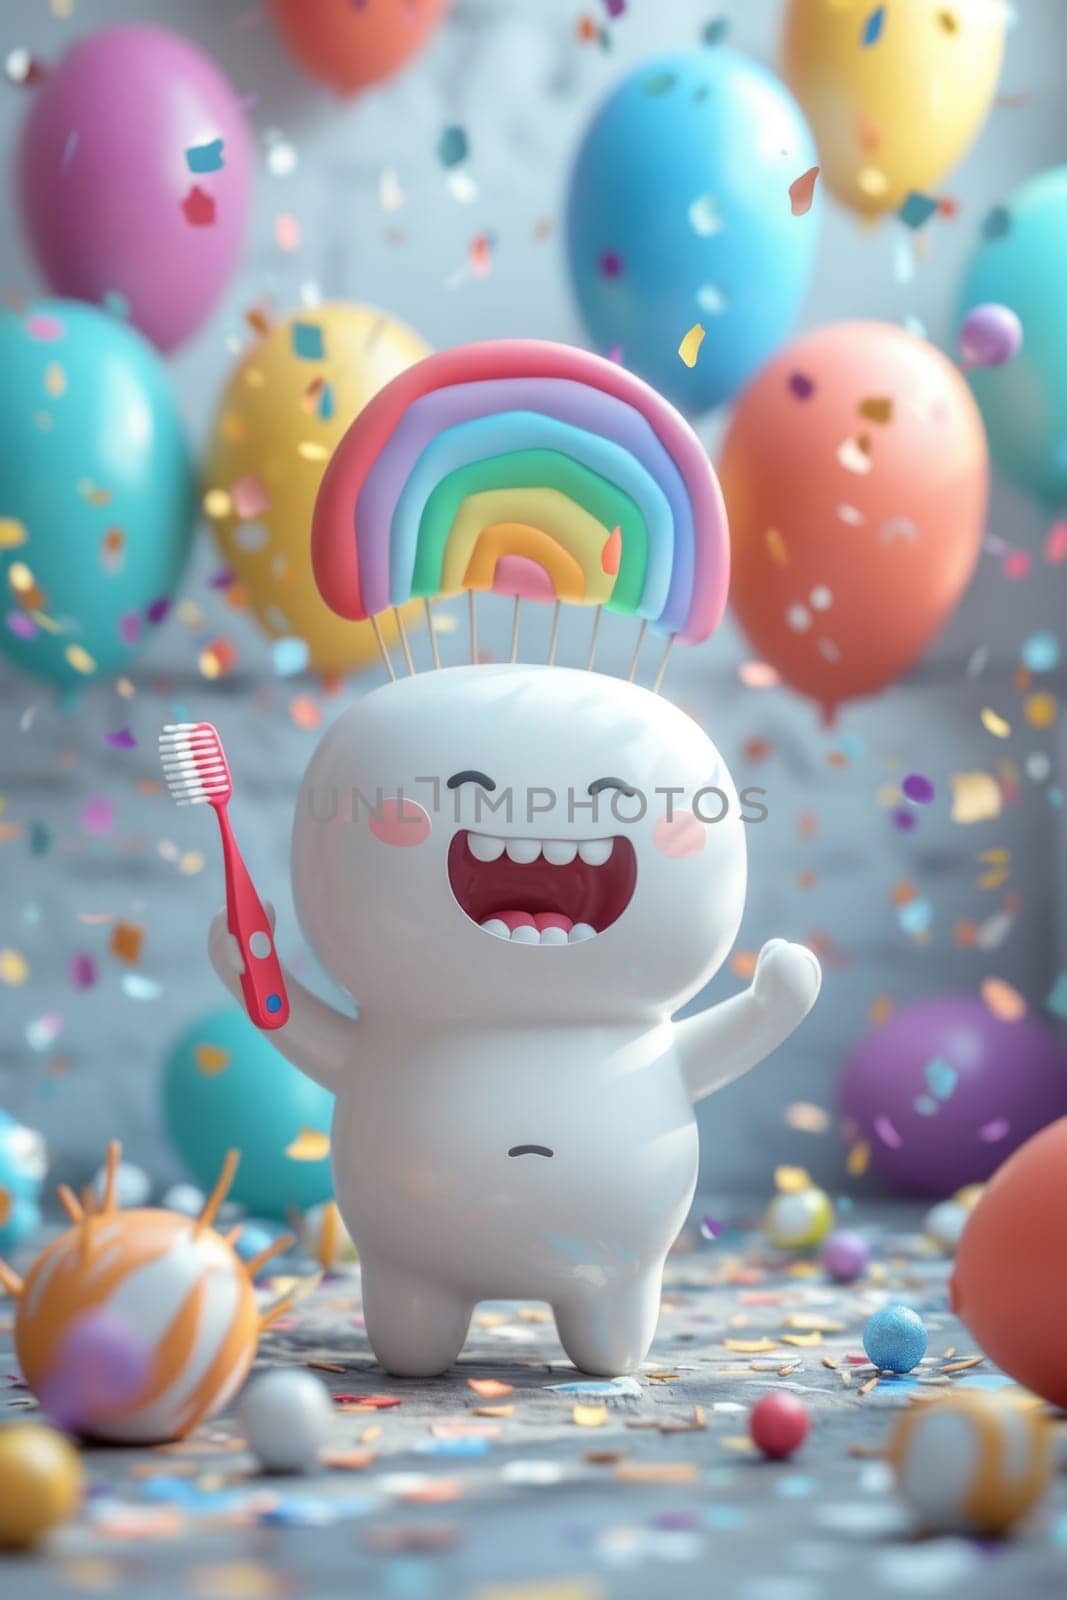 A happy smiling tooth on a festive background with colorful balls. the concept of a clean tooth. 3d illustration by Lobachad